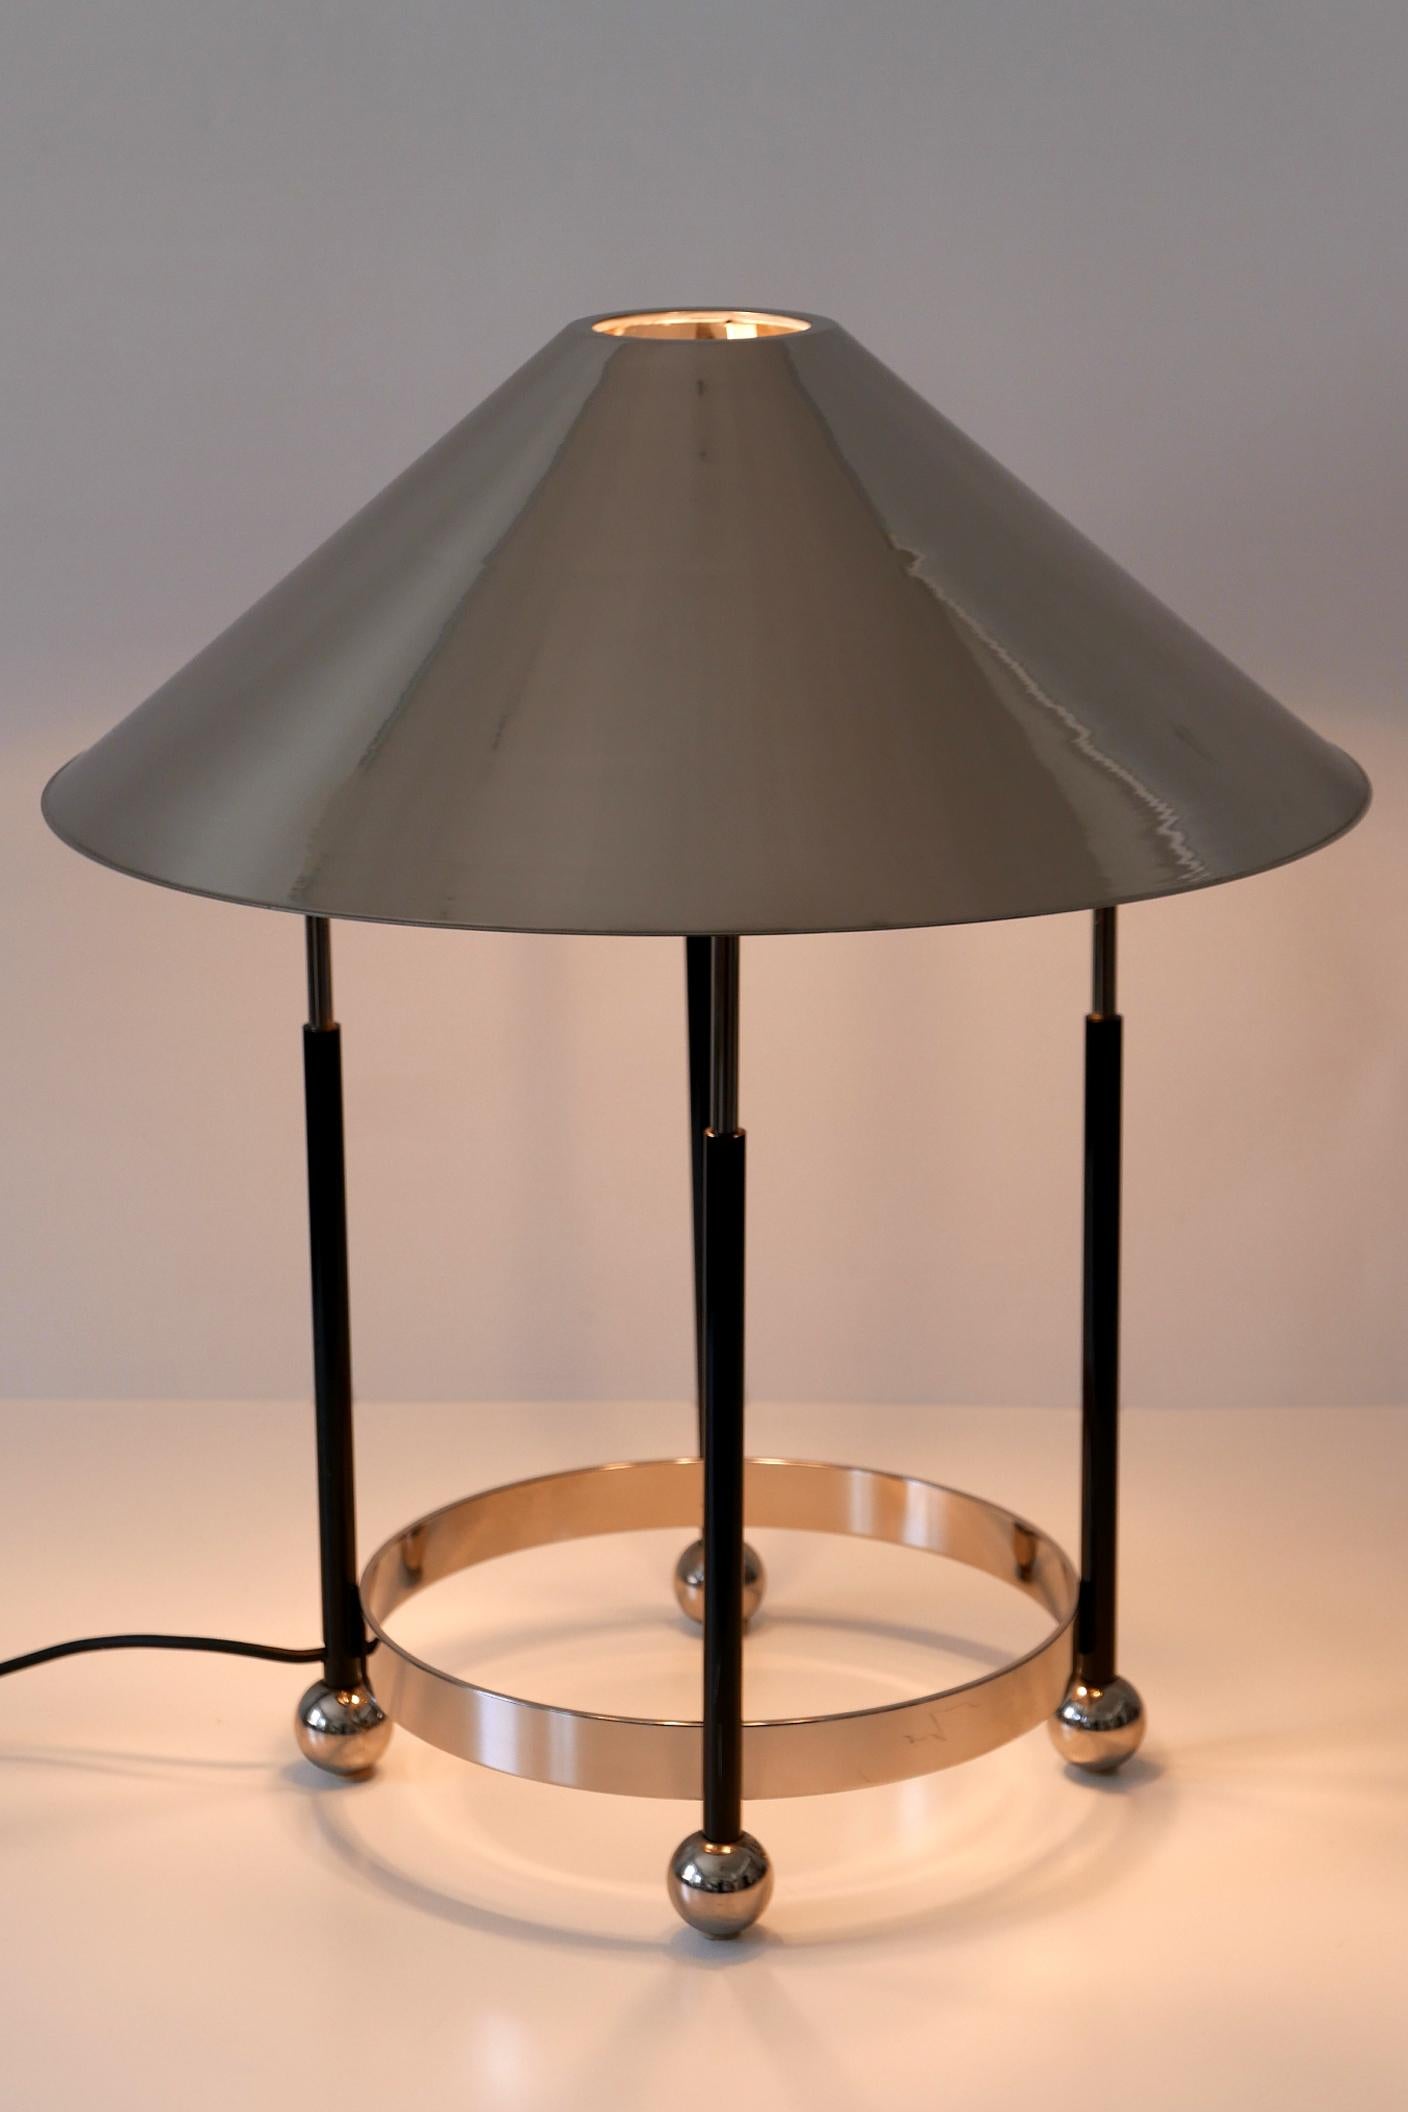 Monumental Mid-Century Modern Nickel-Plated Brass Table Lamp 1970s, Germany For Sale 5